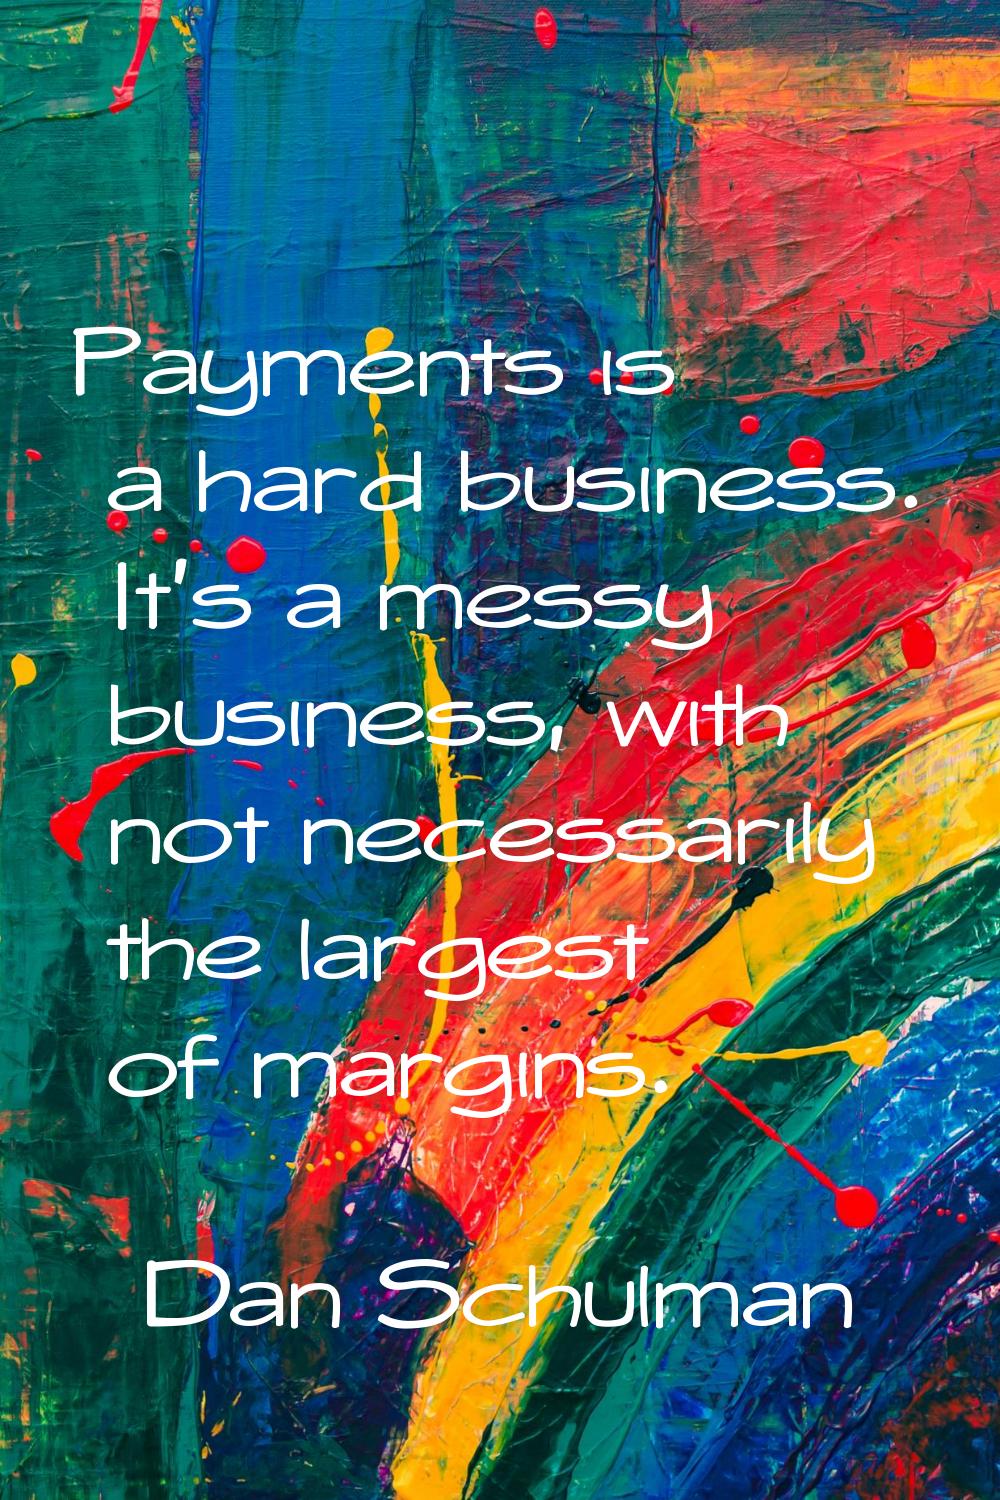 Payments is a hard business. It's a messy business, with not necessarily the largest of margins.